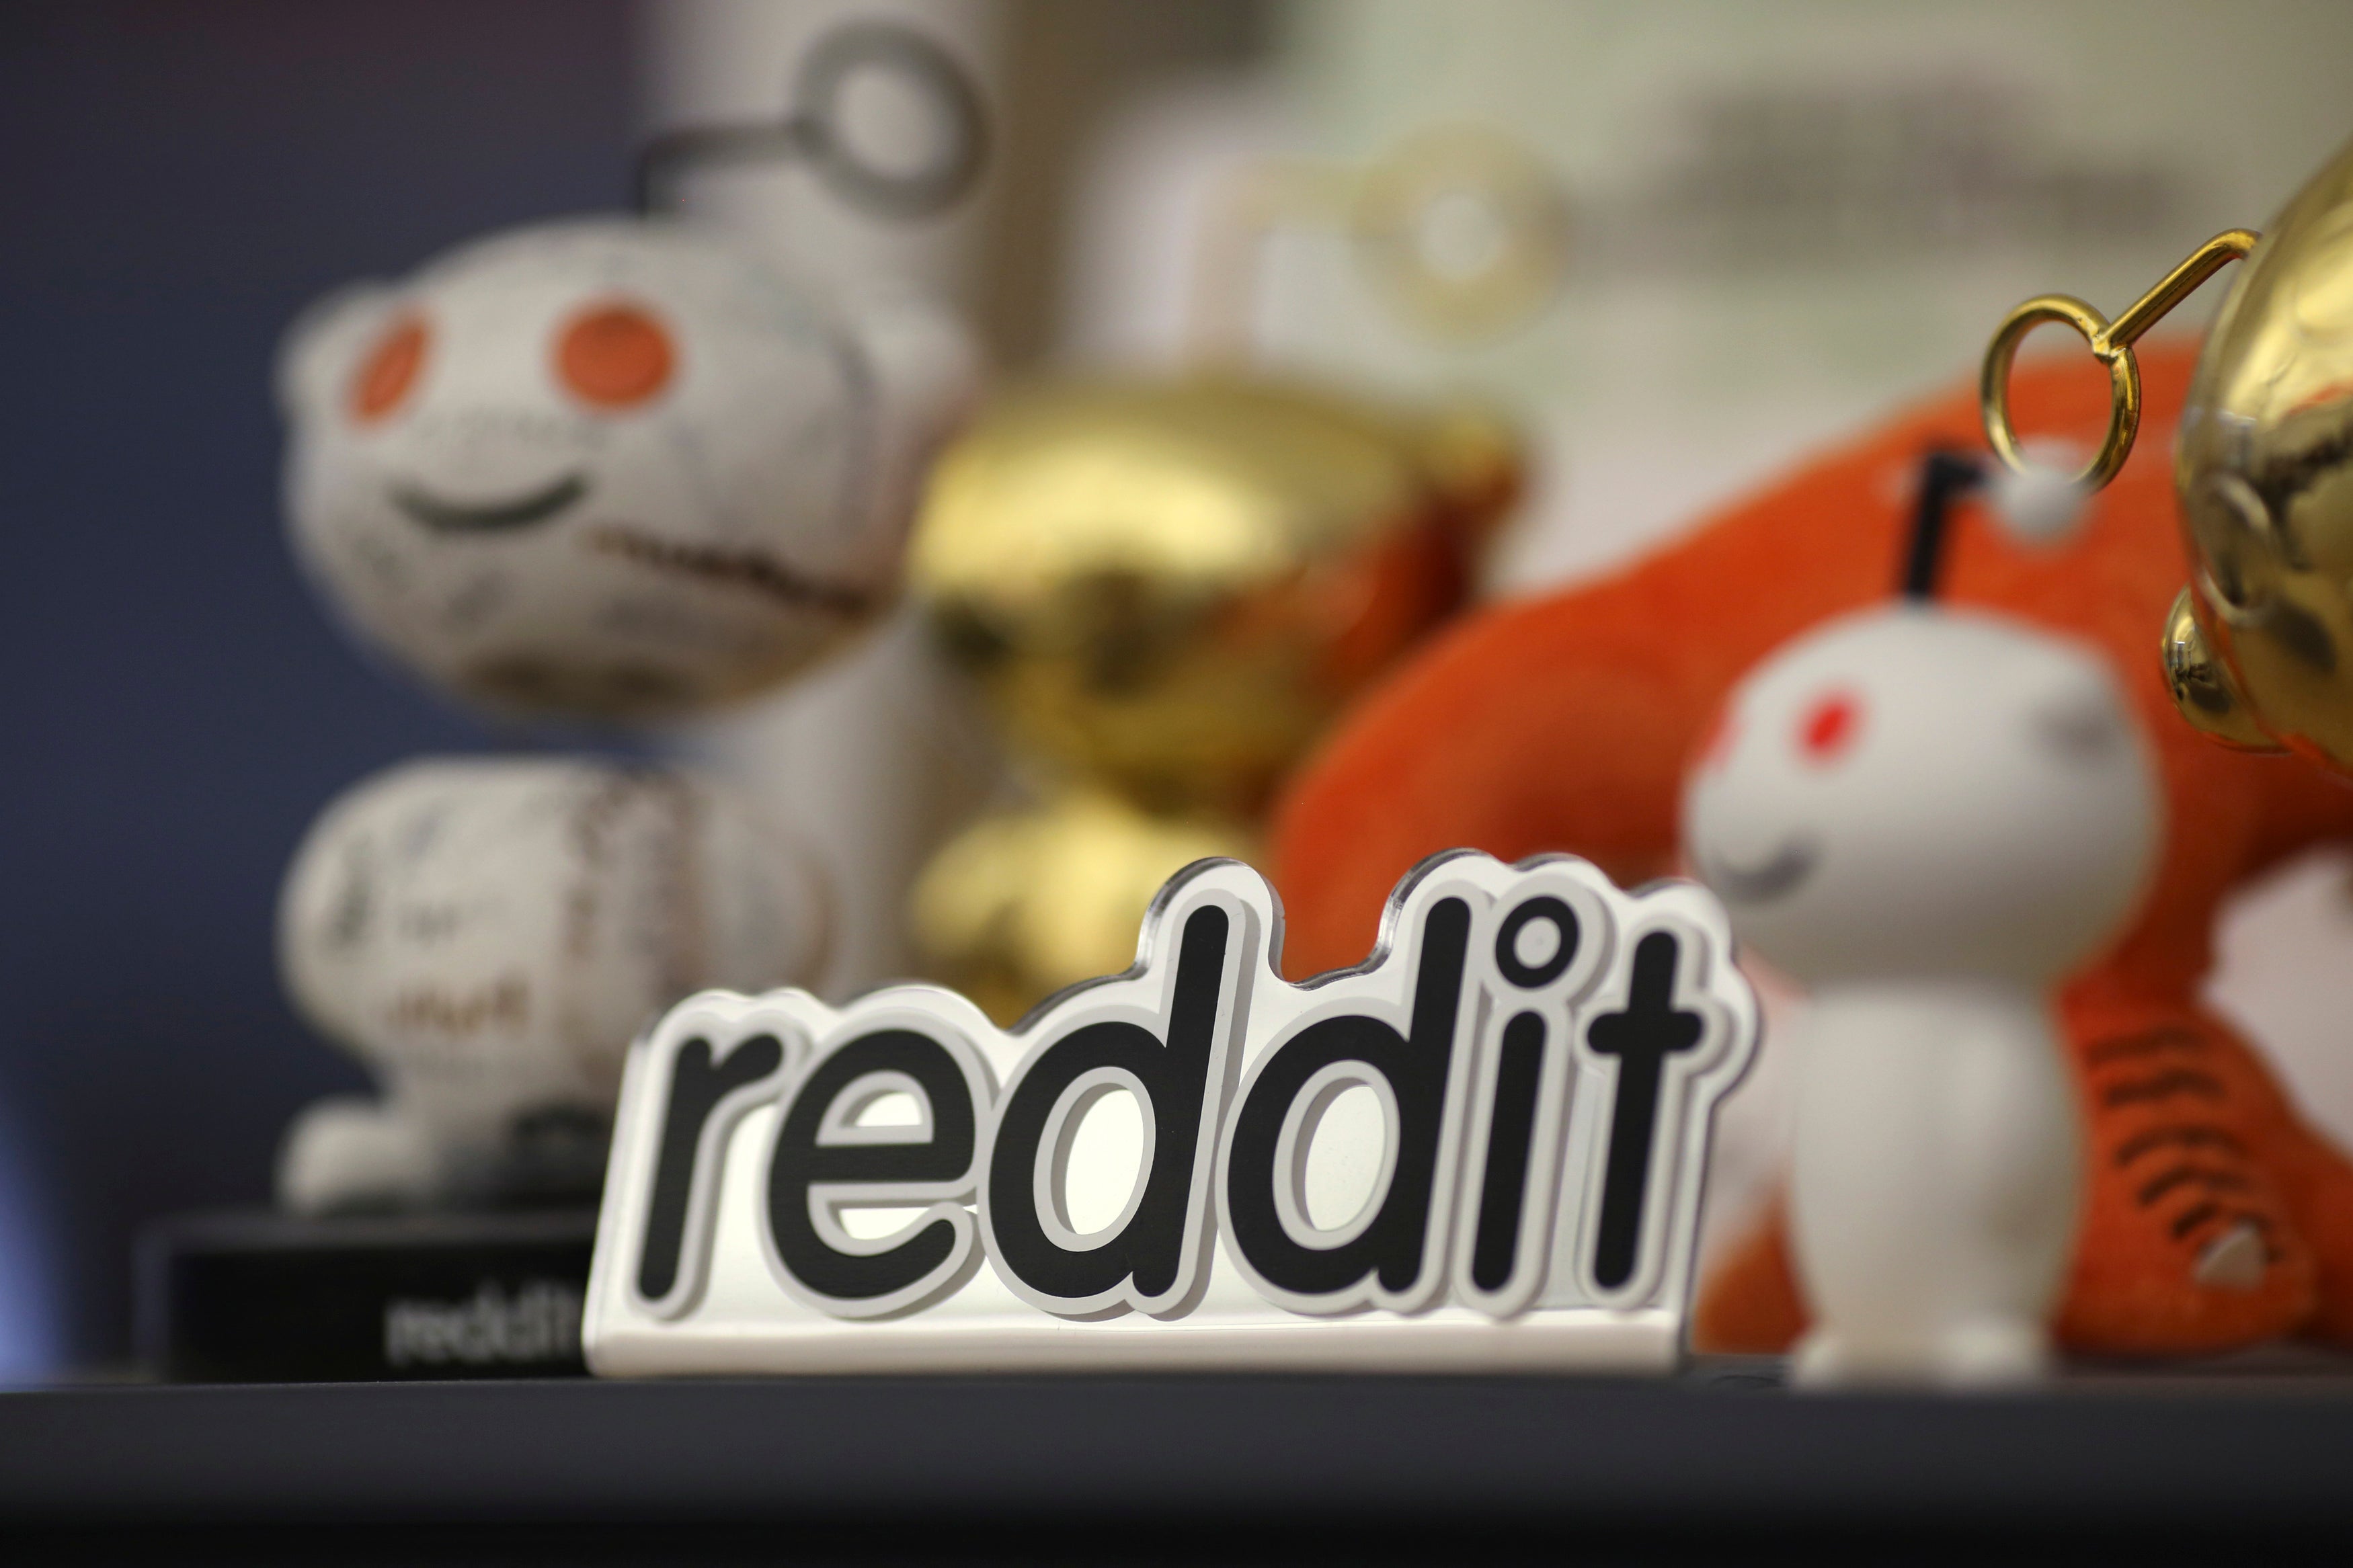 Adorable Reddit mascots being adorable.